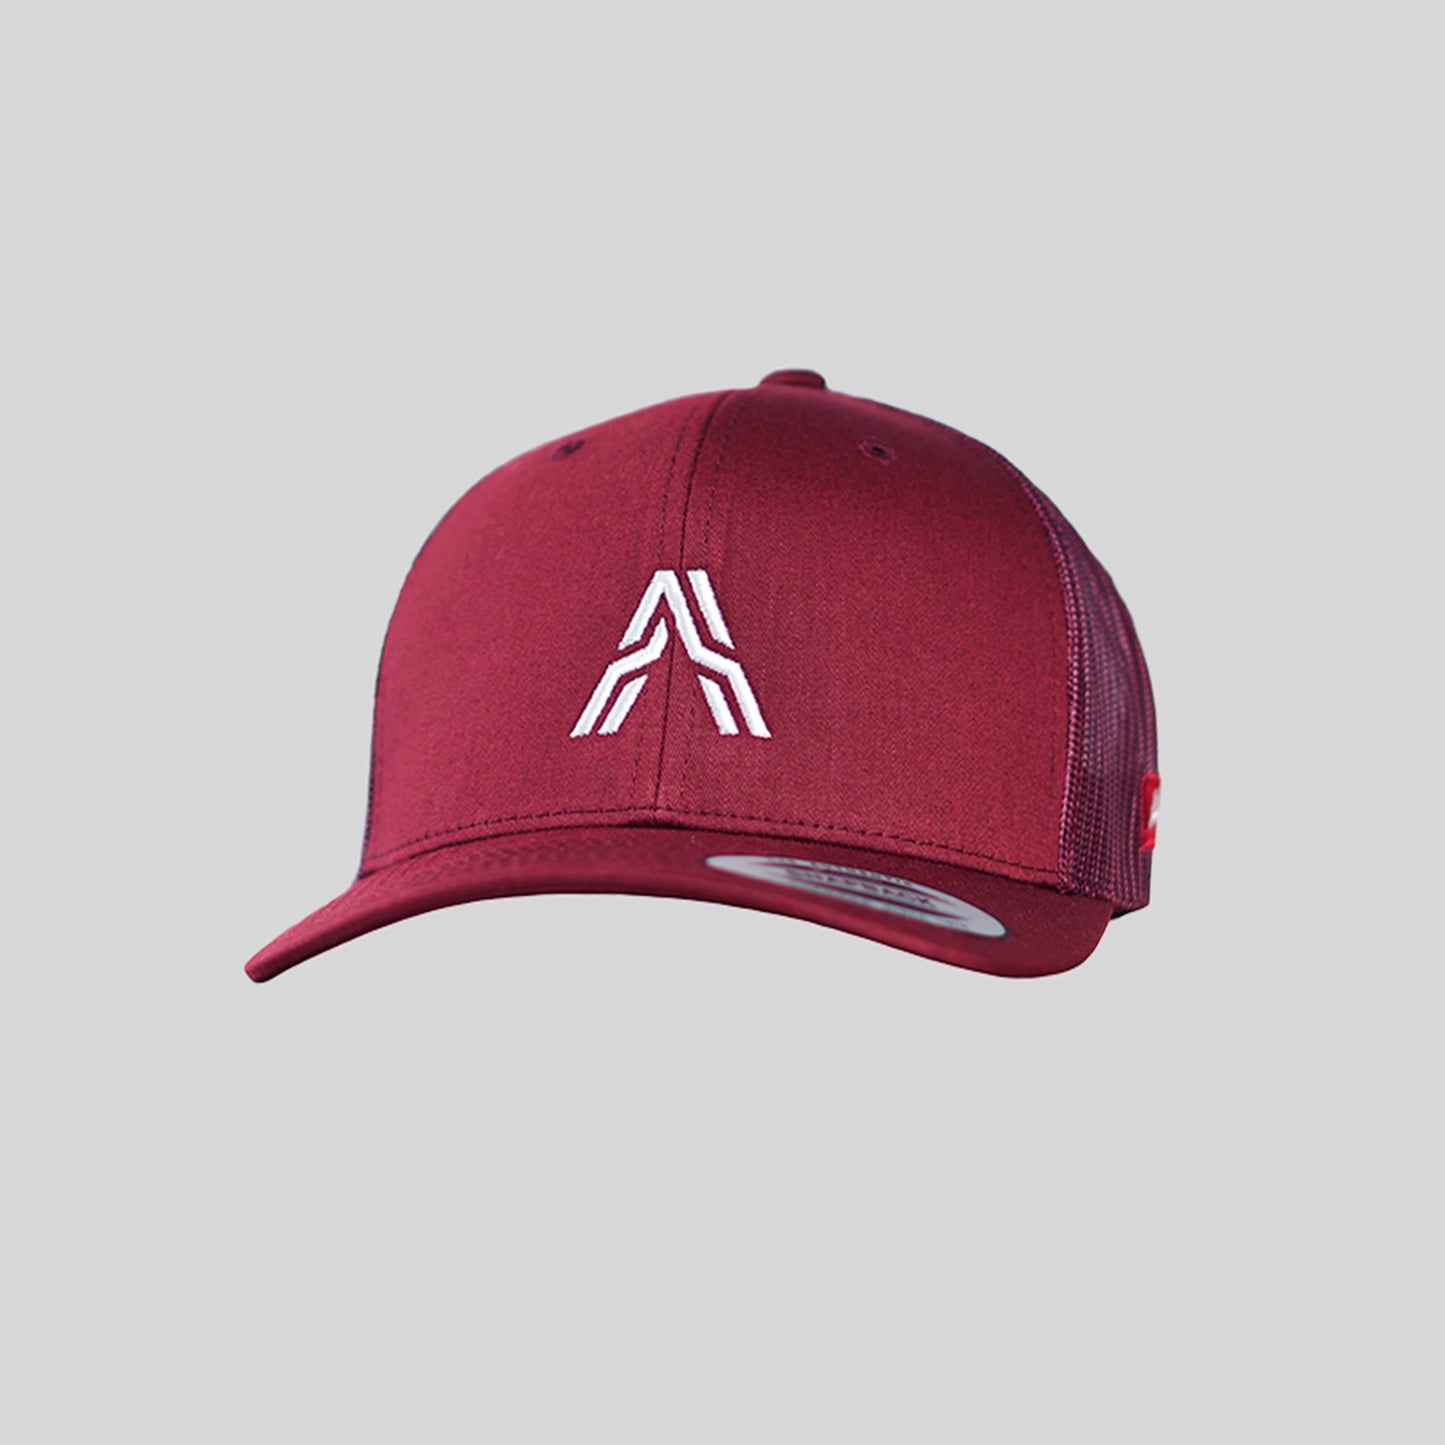 Embroidery Retro Trucker Cap Bordeaux by Ascender Cycling Club Zürich Switzerland Front View